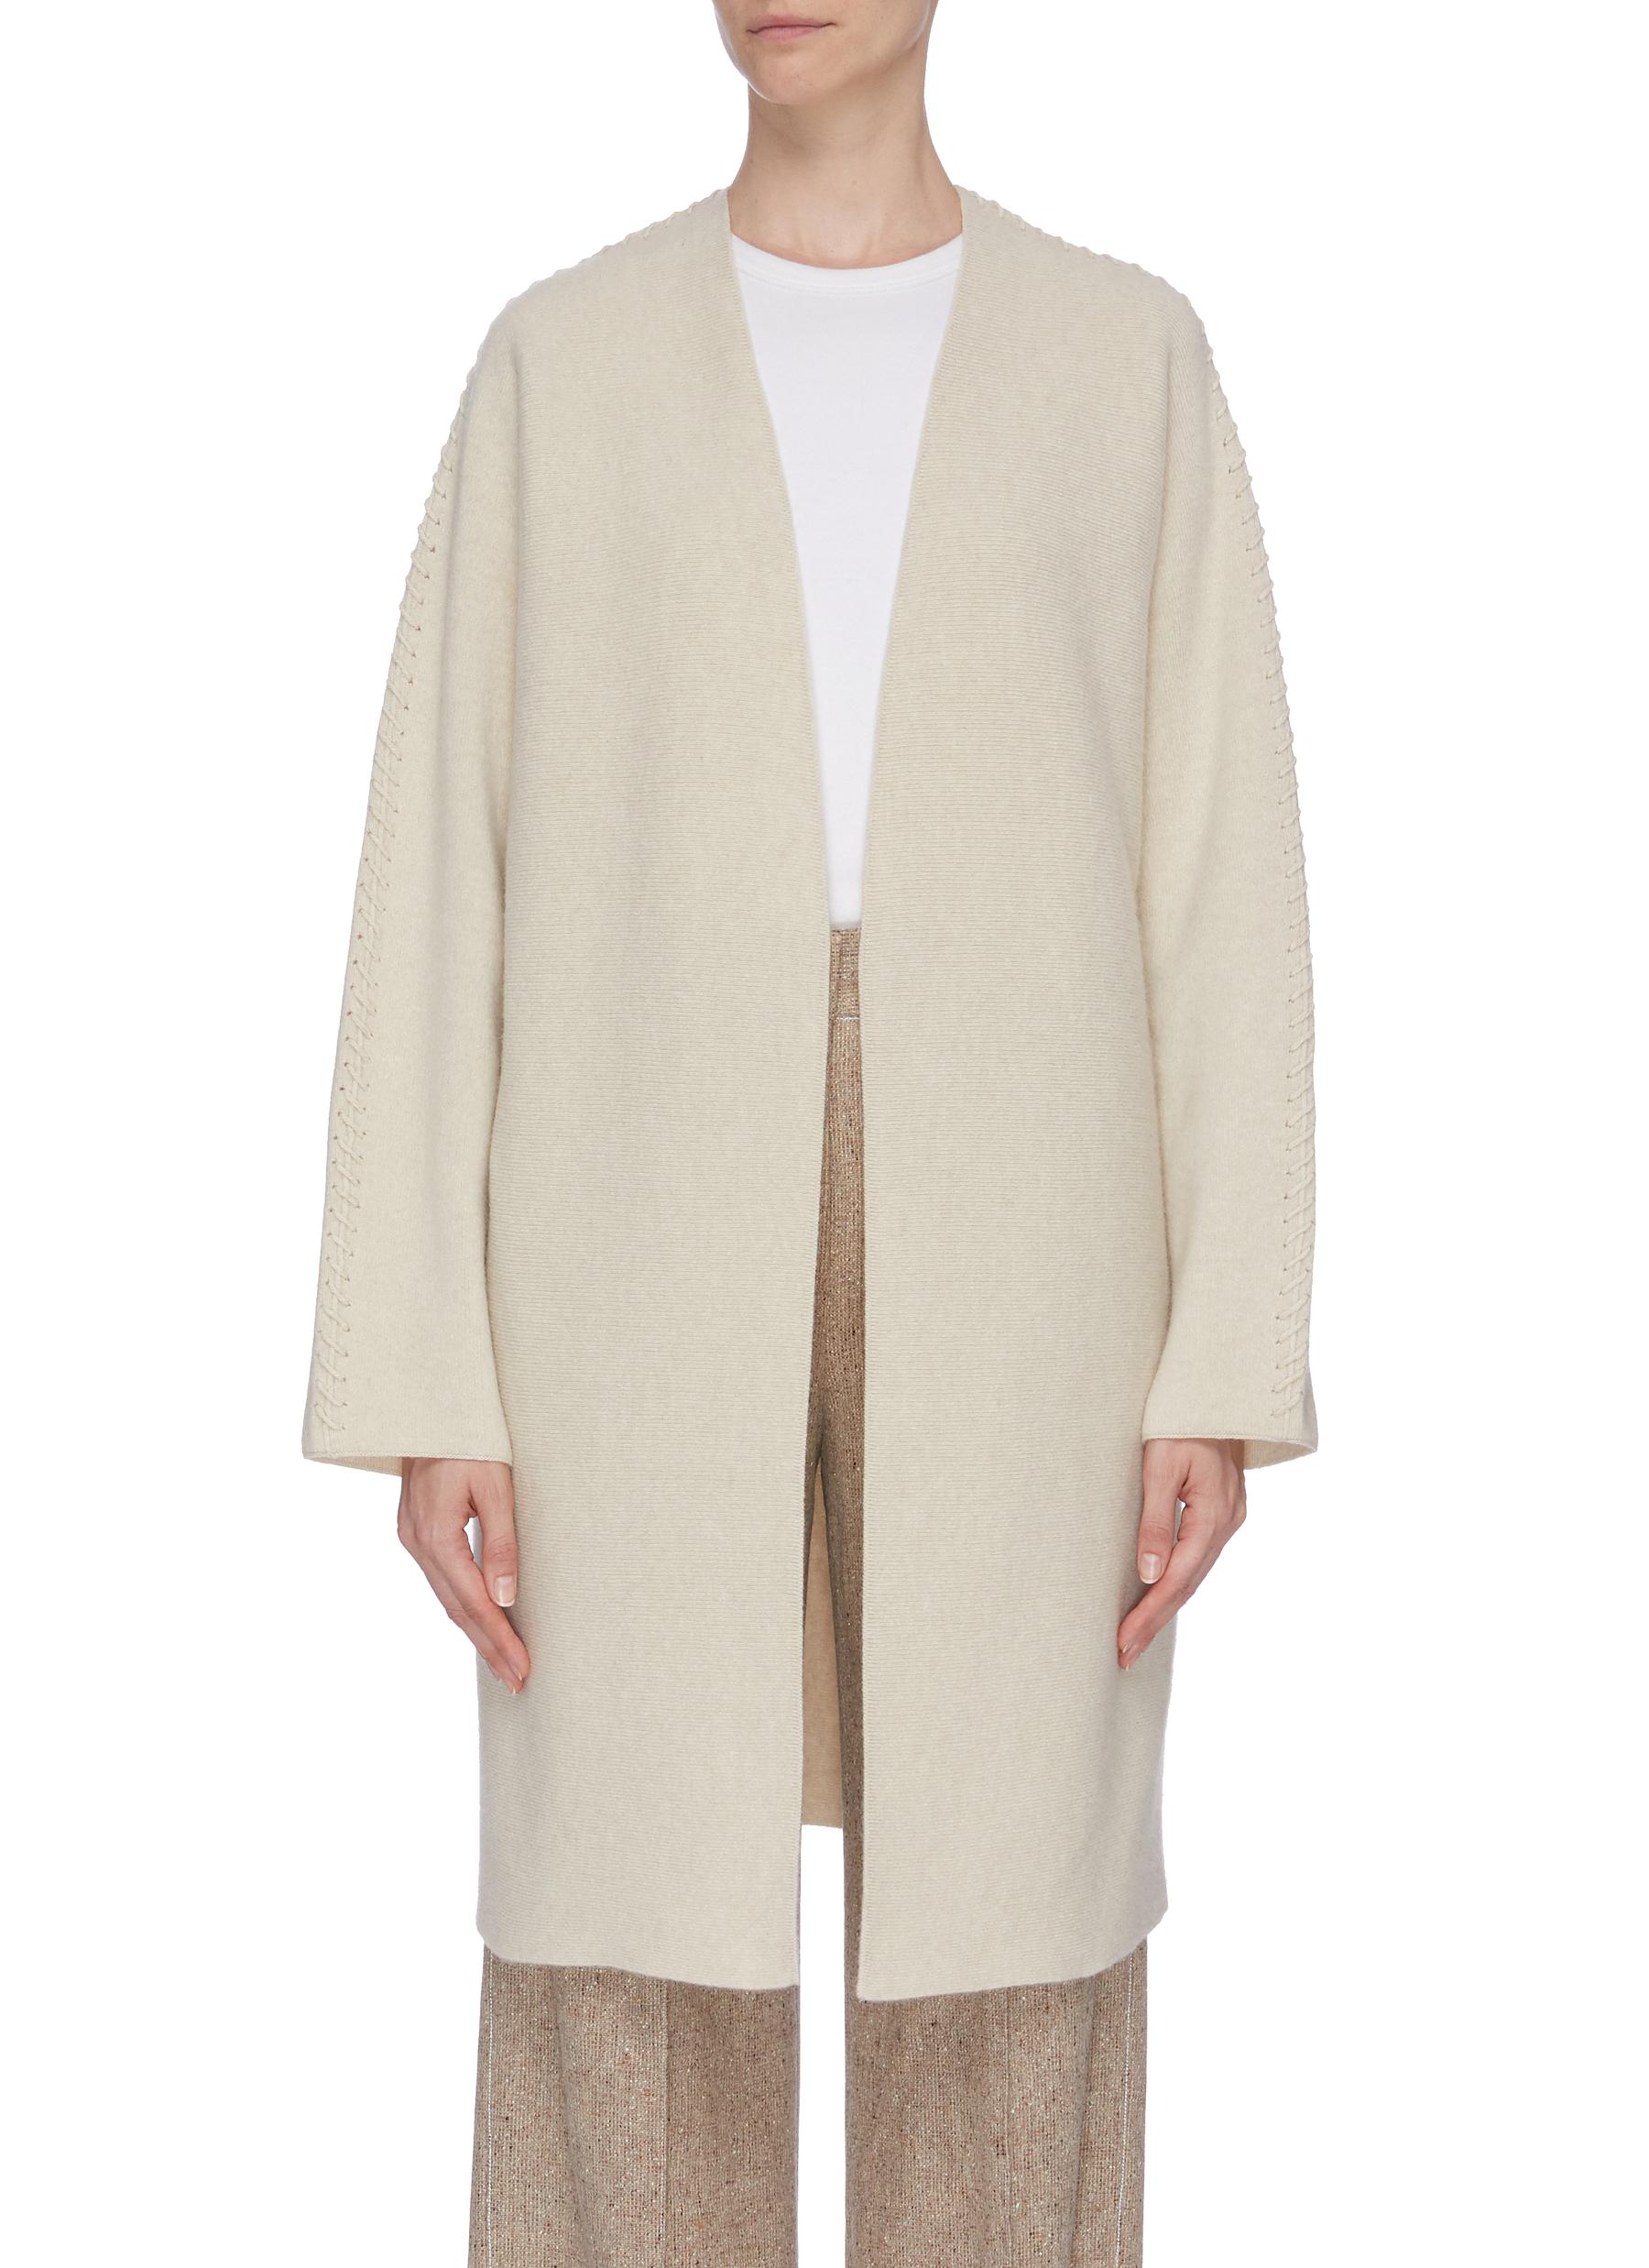 Whipstitch open coat by Theory | Coshio Online Shop